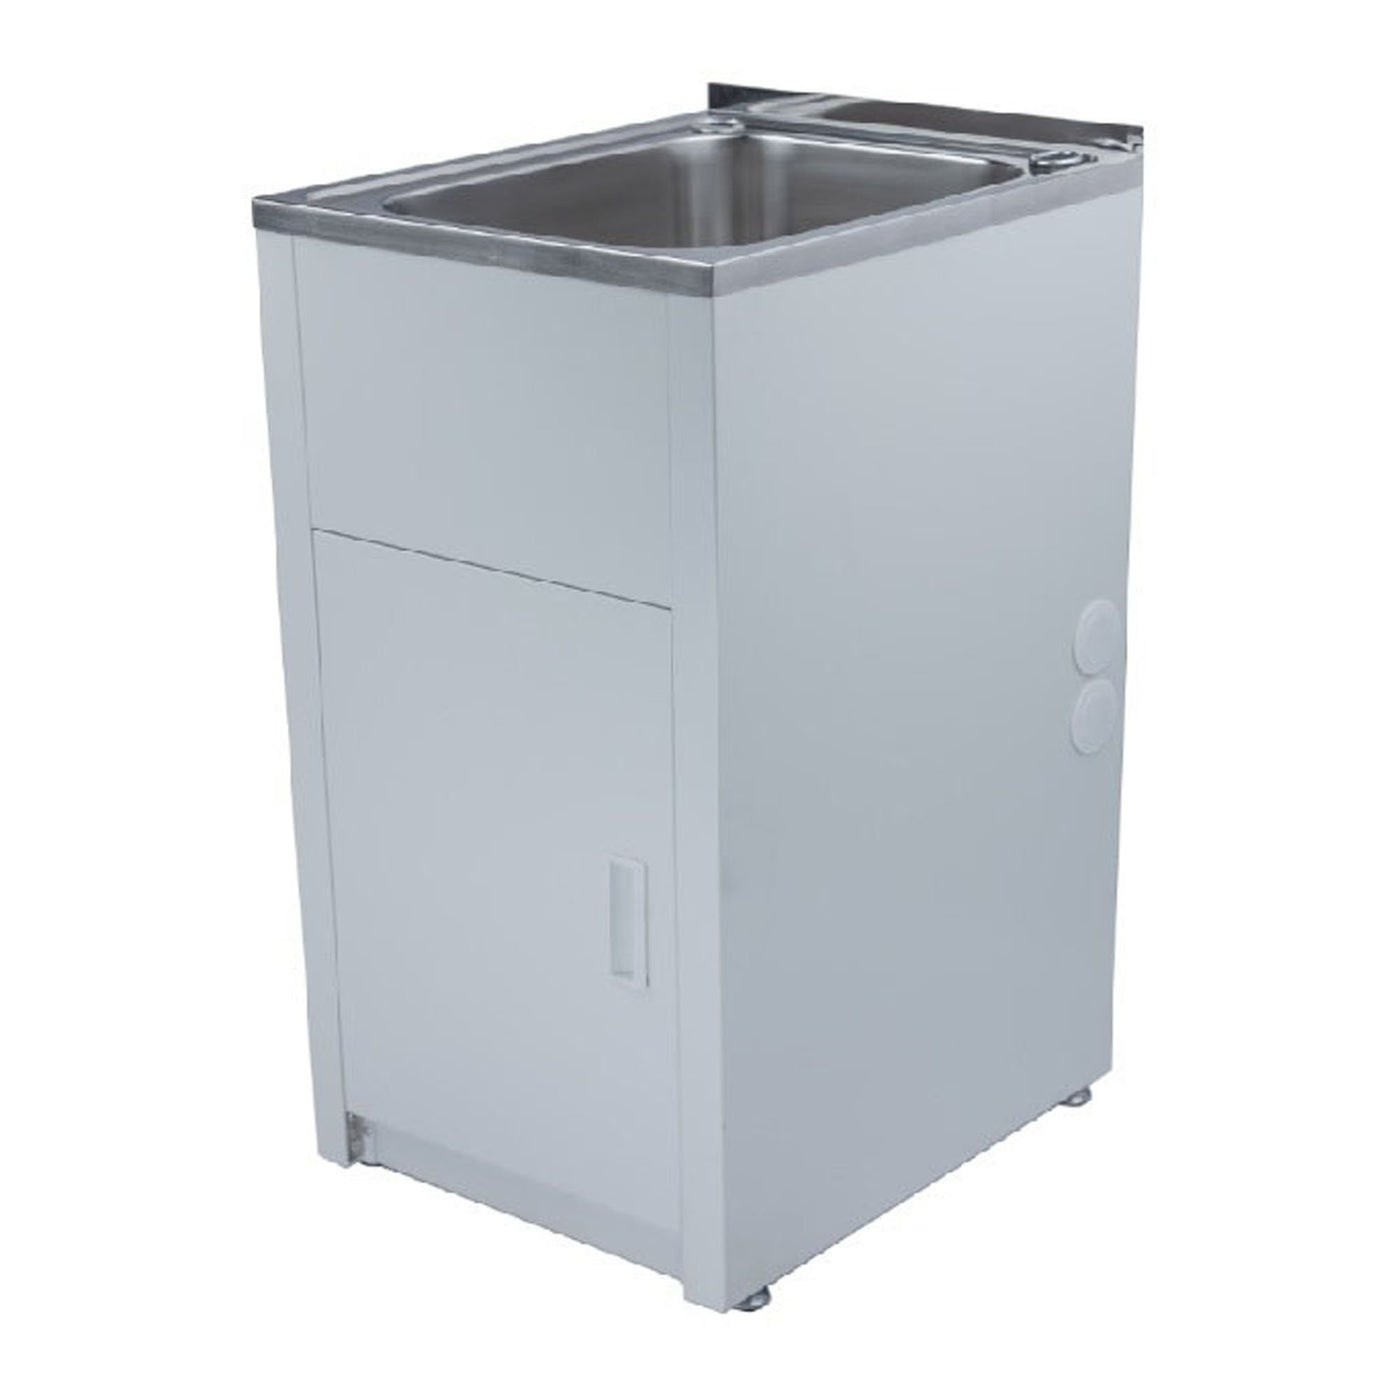 Ground 45 Liter Compact Laundry Tub & Cabinet